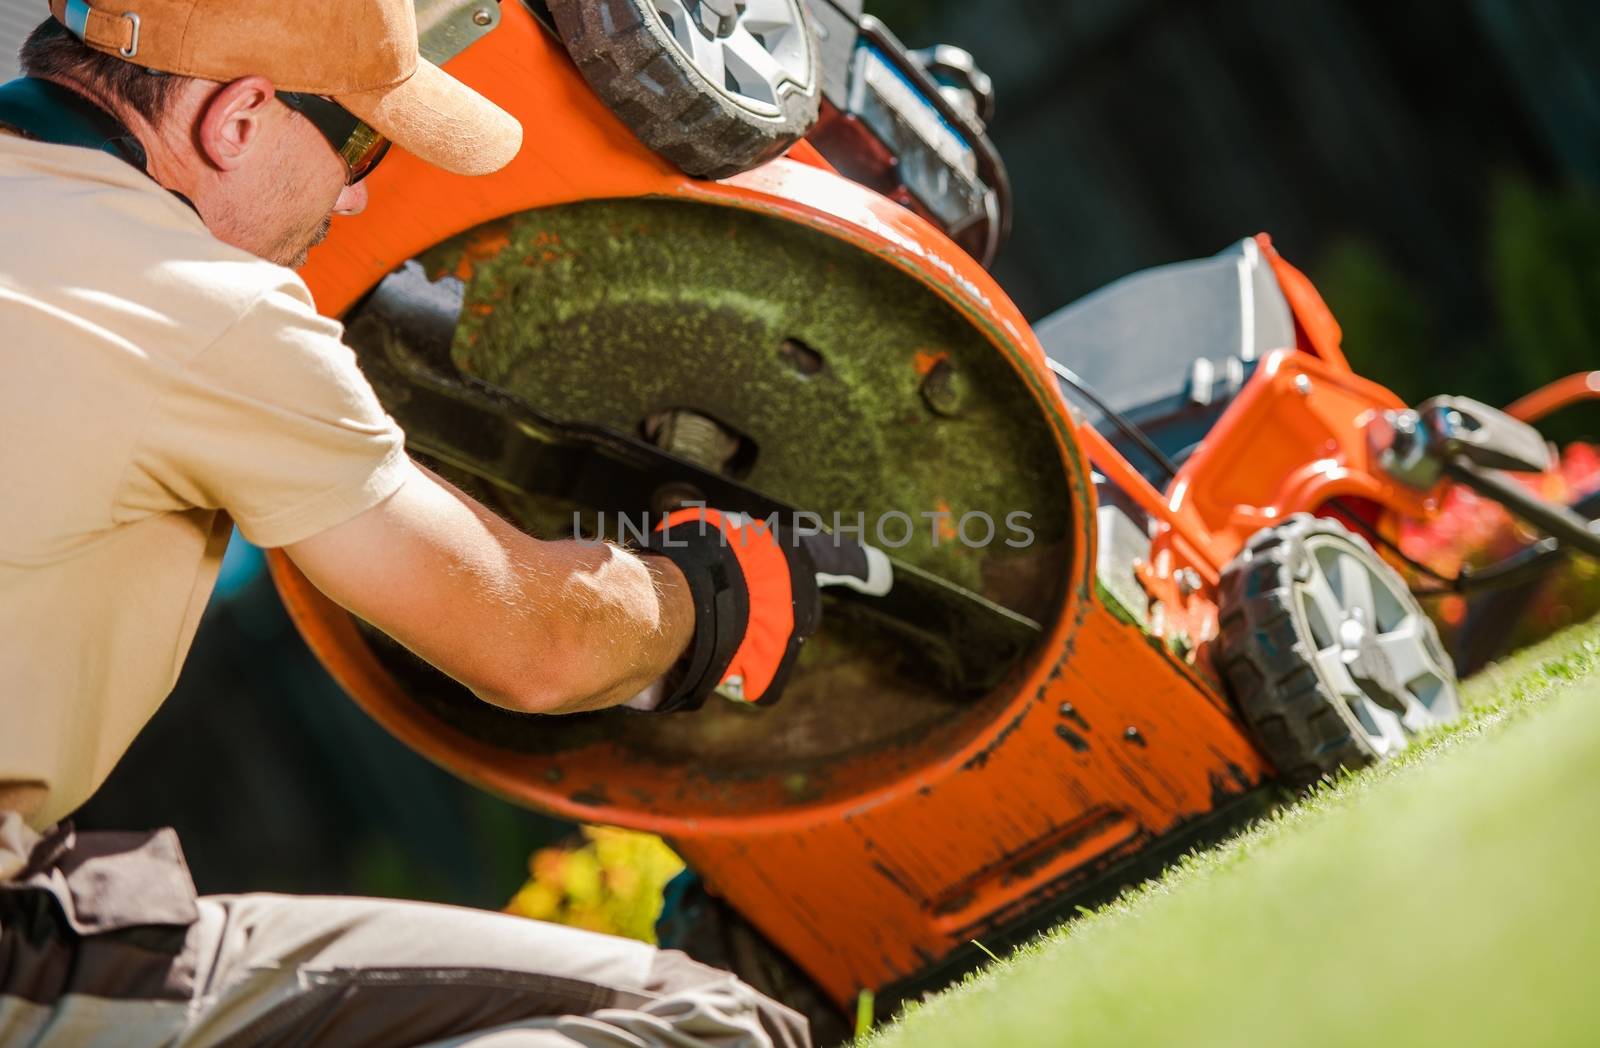 Checking Lawn Mower Blades by welcomia